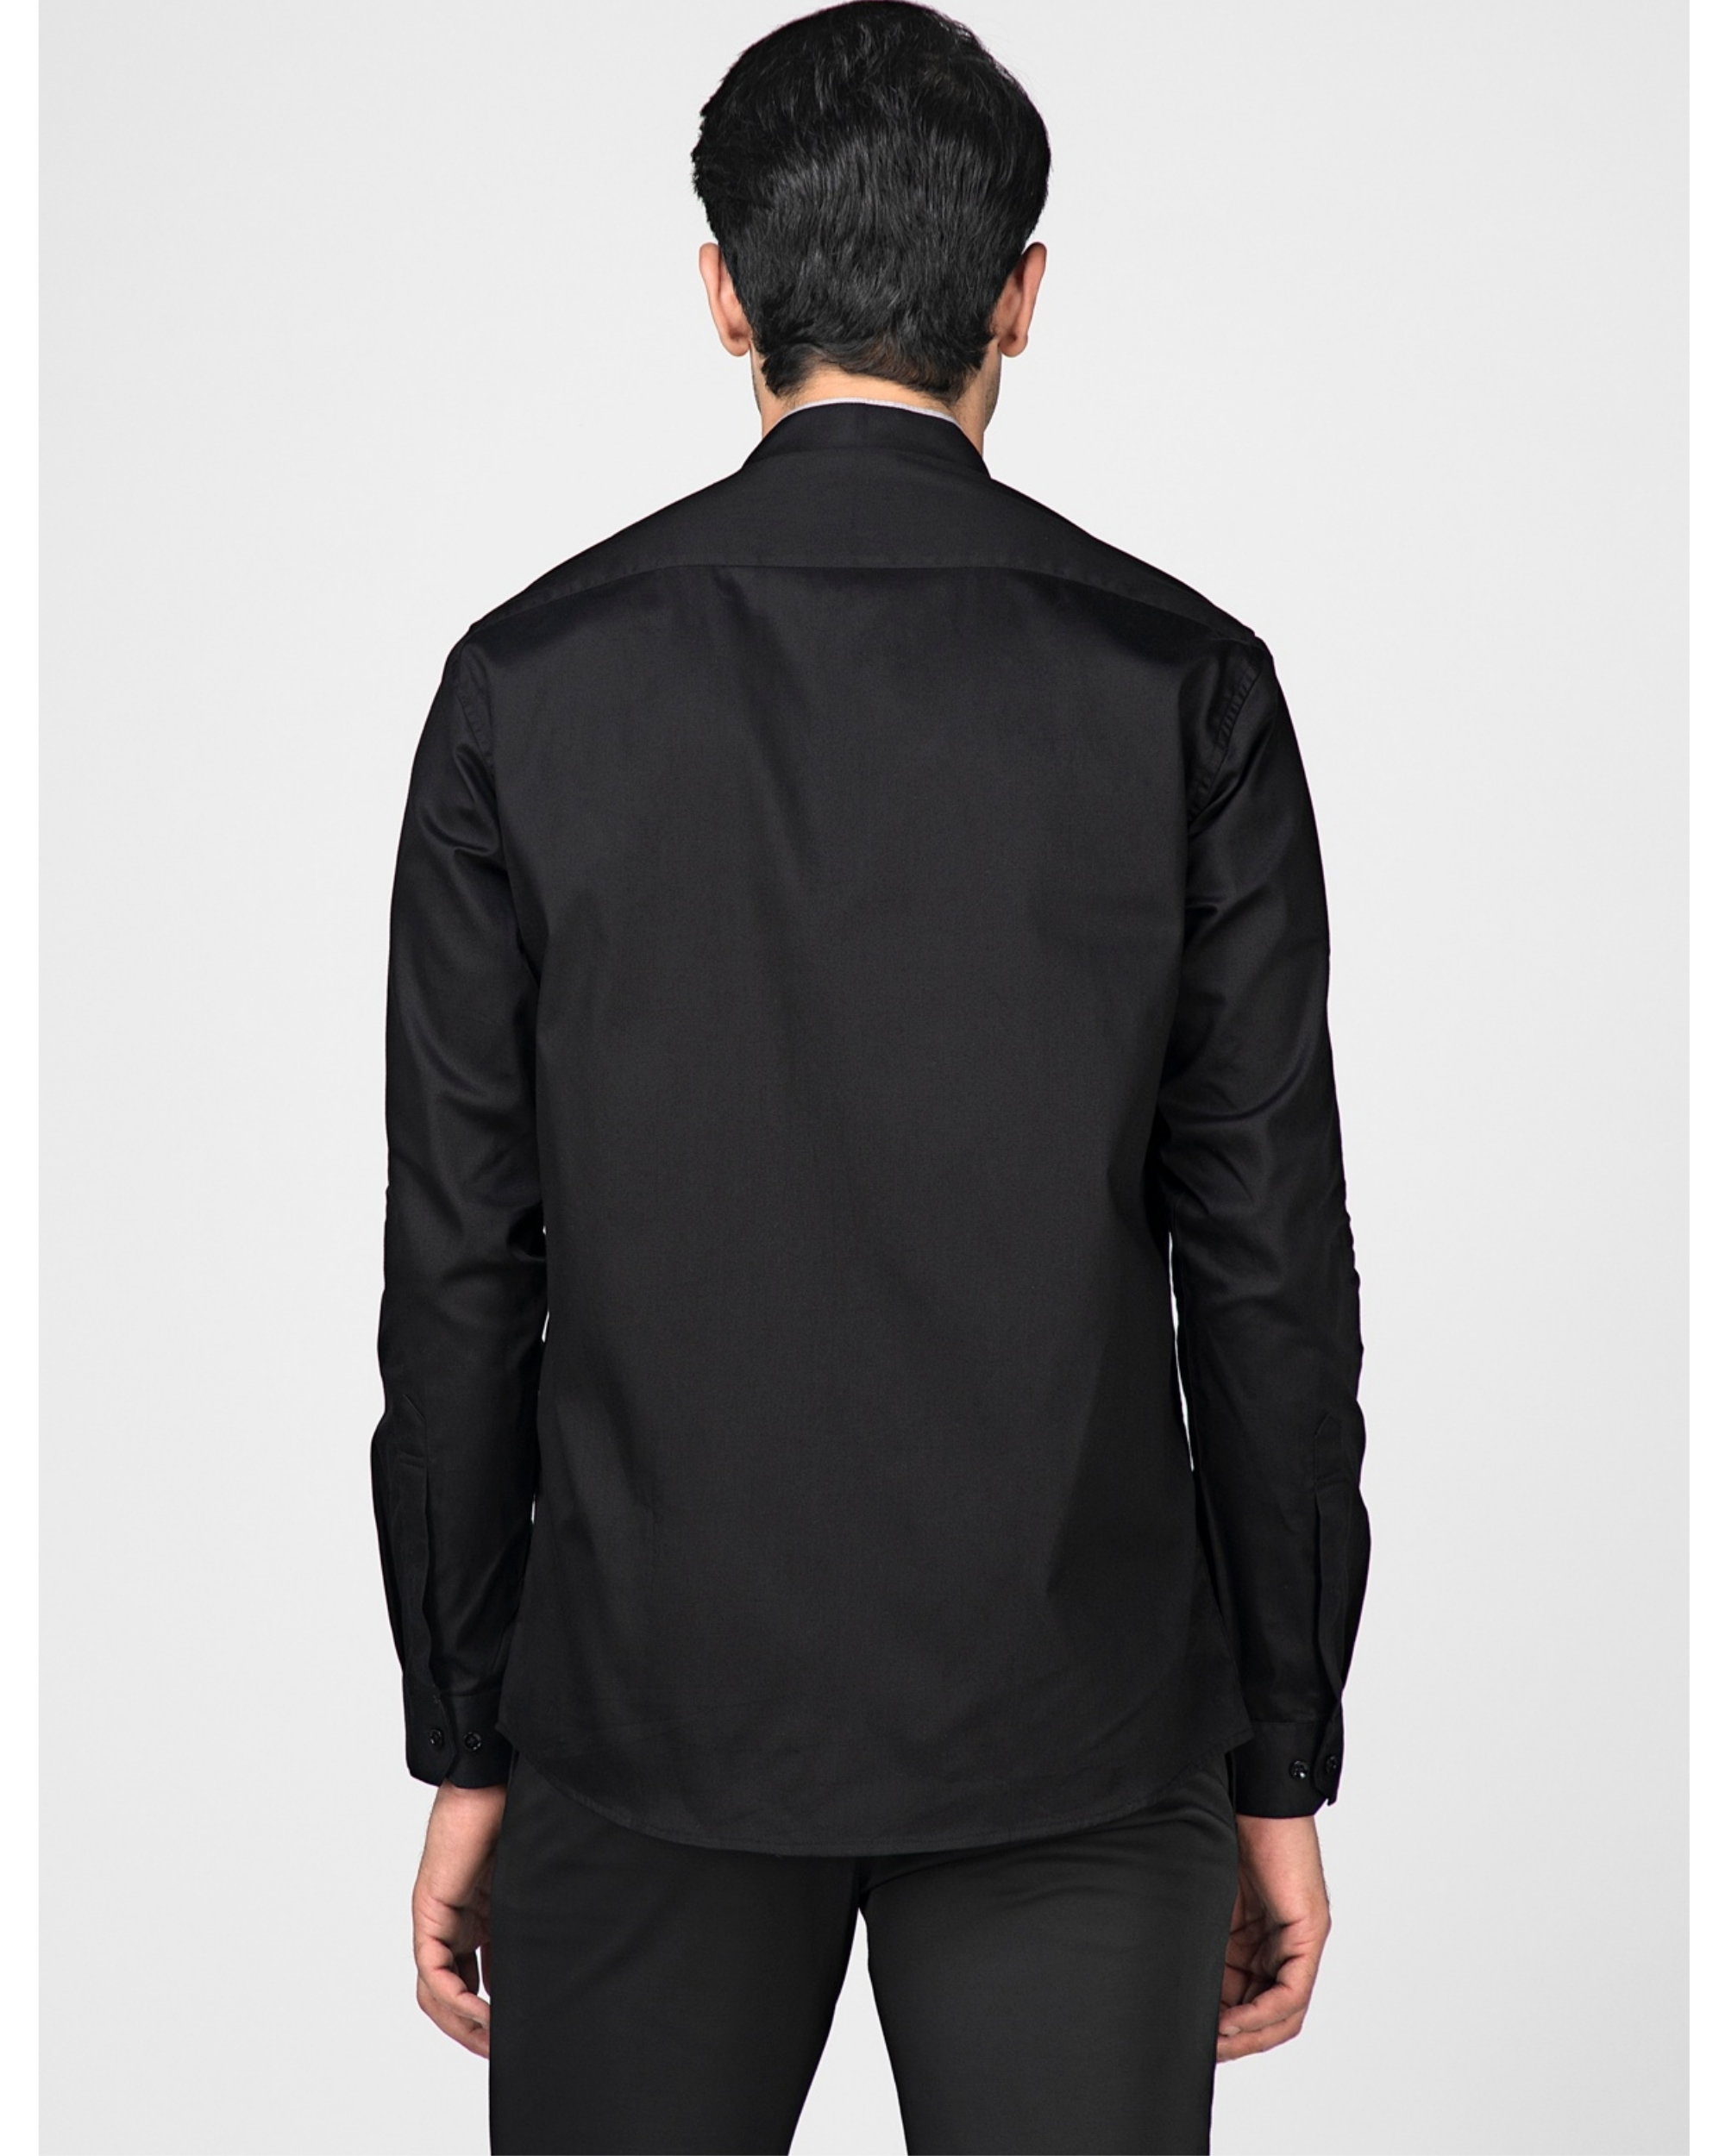 Black ethnic shirt with contrast panel detailing by Green Hill | The ...